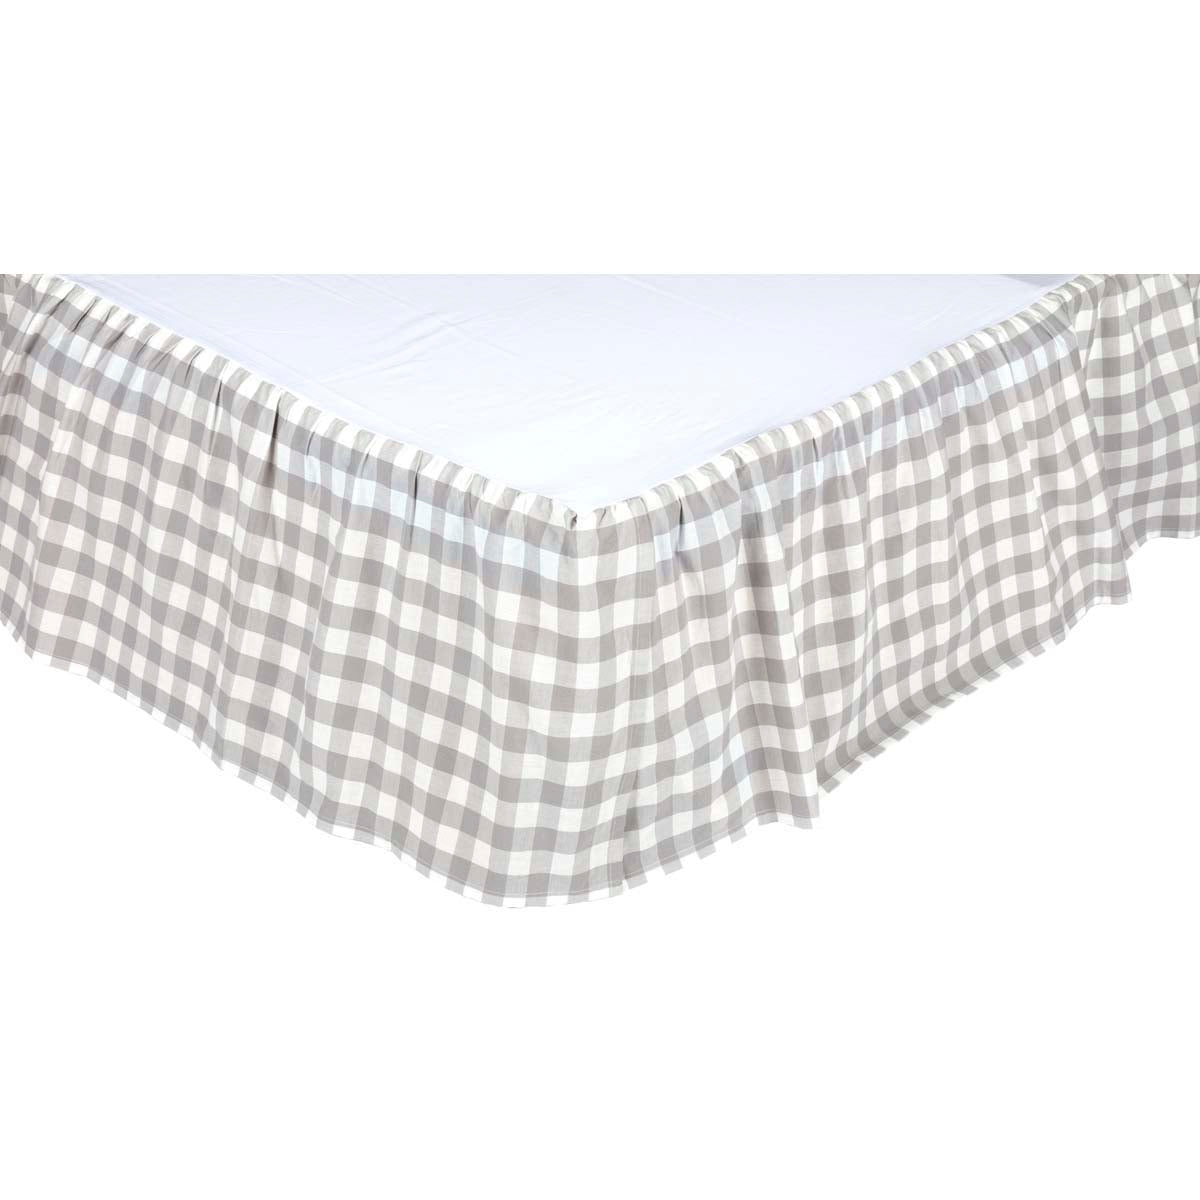 April & Olive Annie Buffalo Grey Check Twin Bed Skirt 39x76x16 By VHC Brands